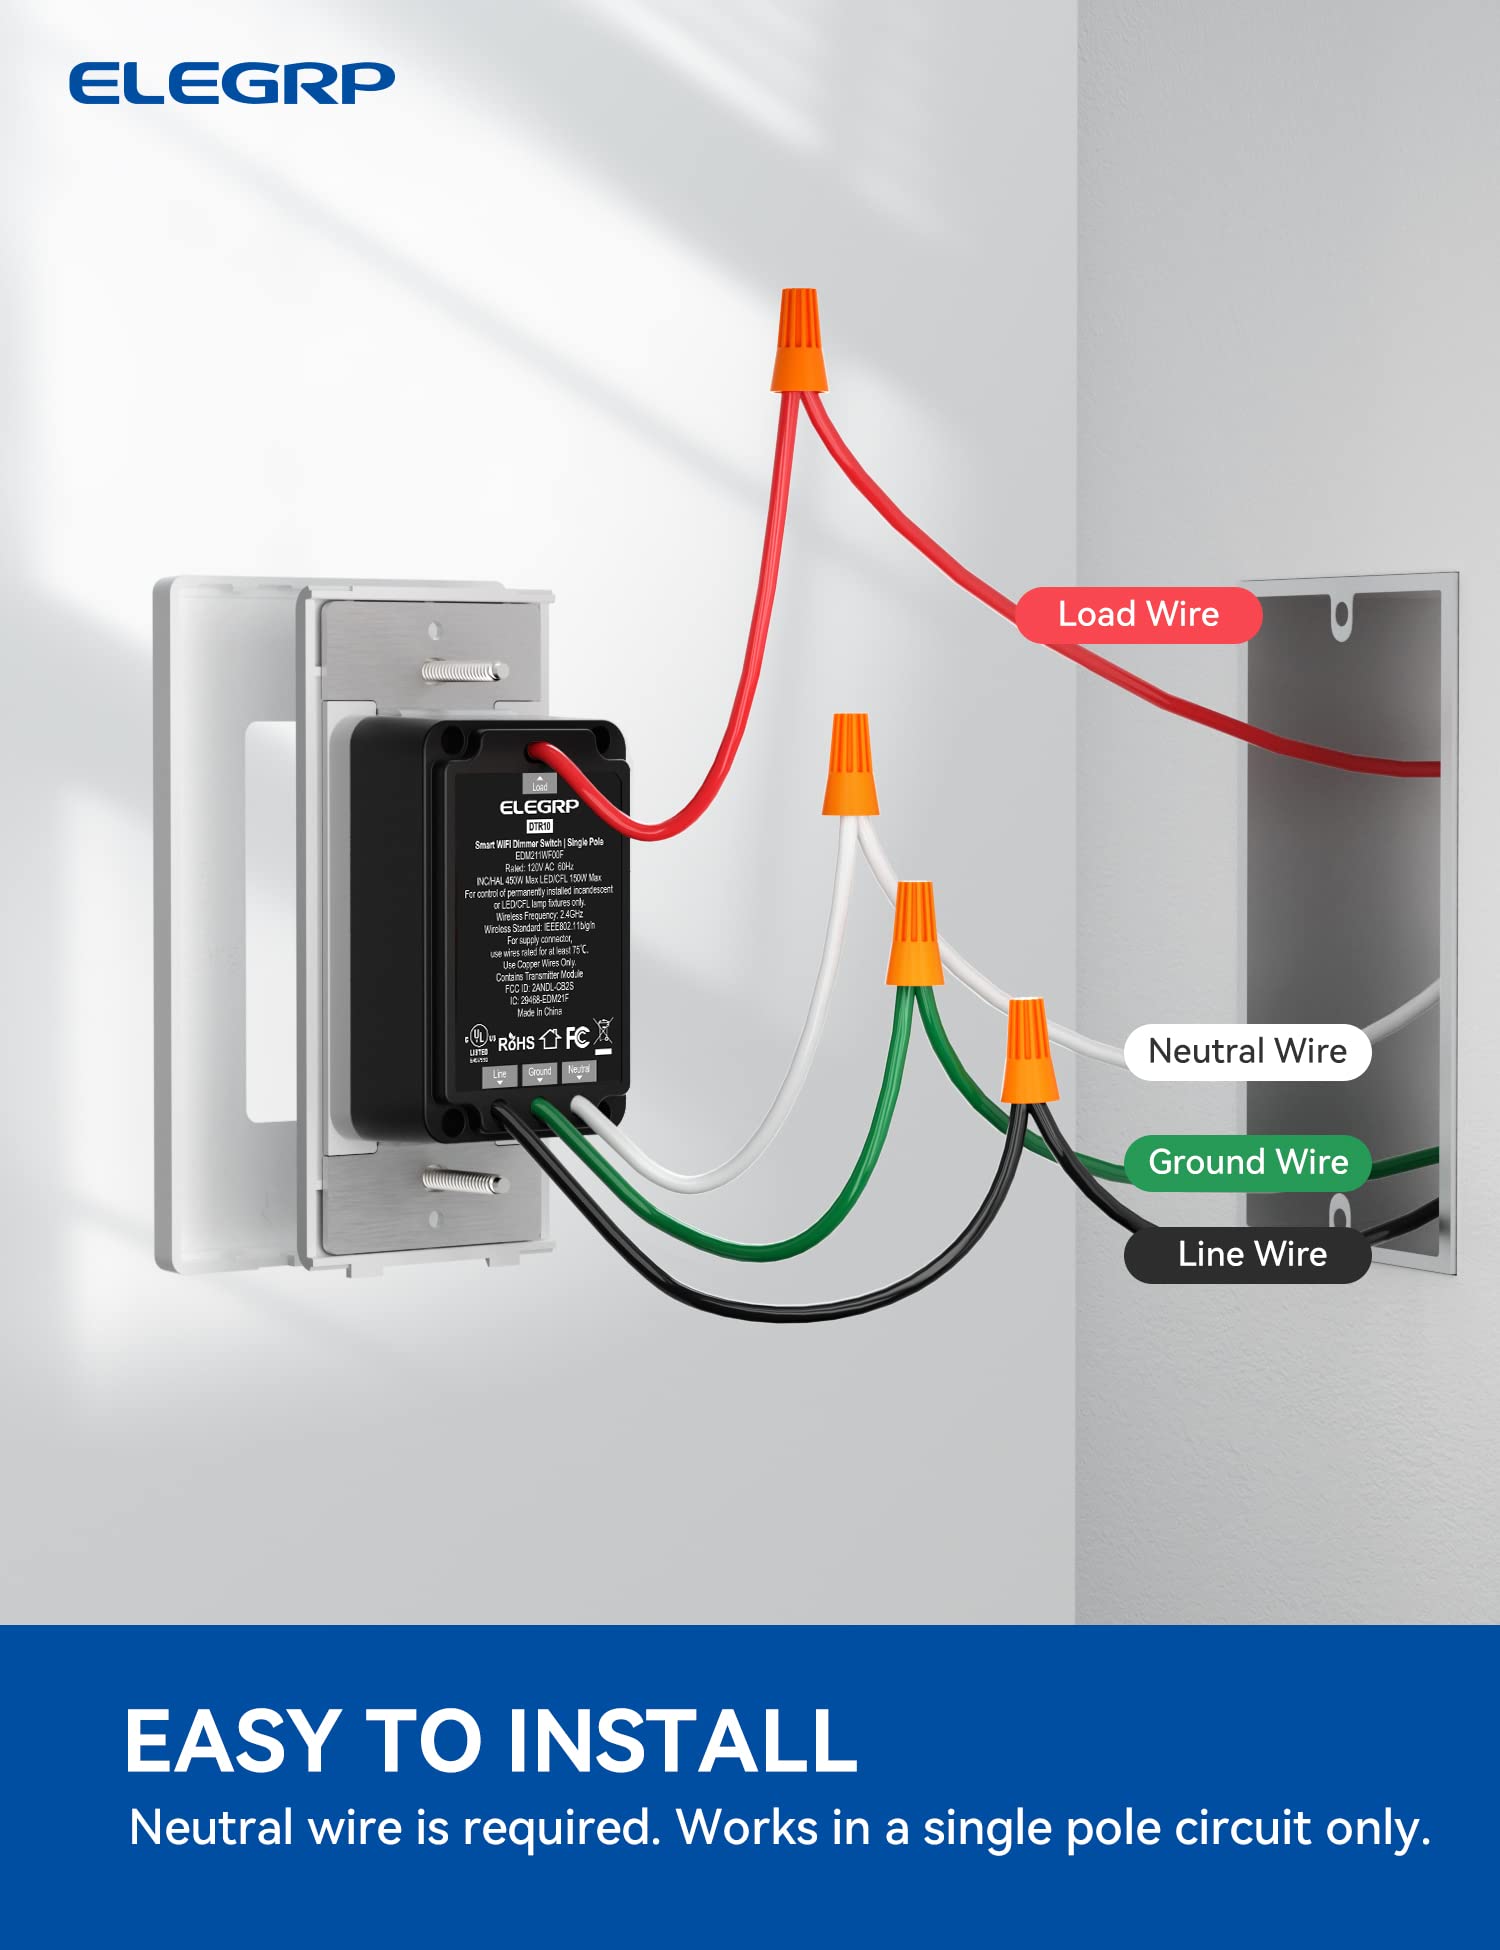 How to Install the Feit Electric Smart Dimmer as a Single Pole Dimmer Switch  